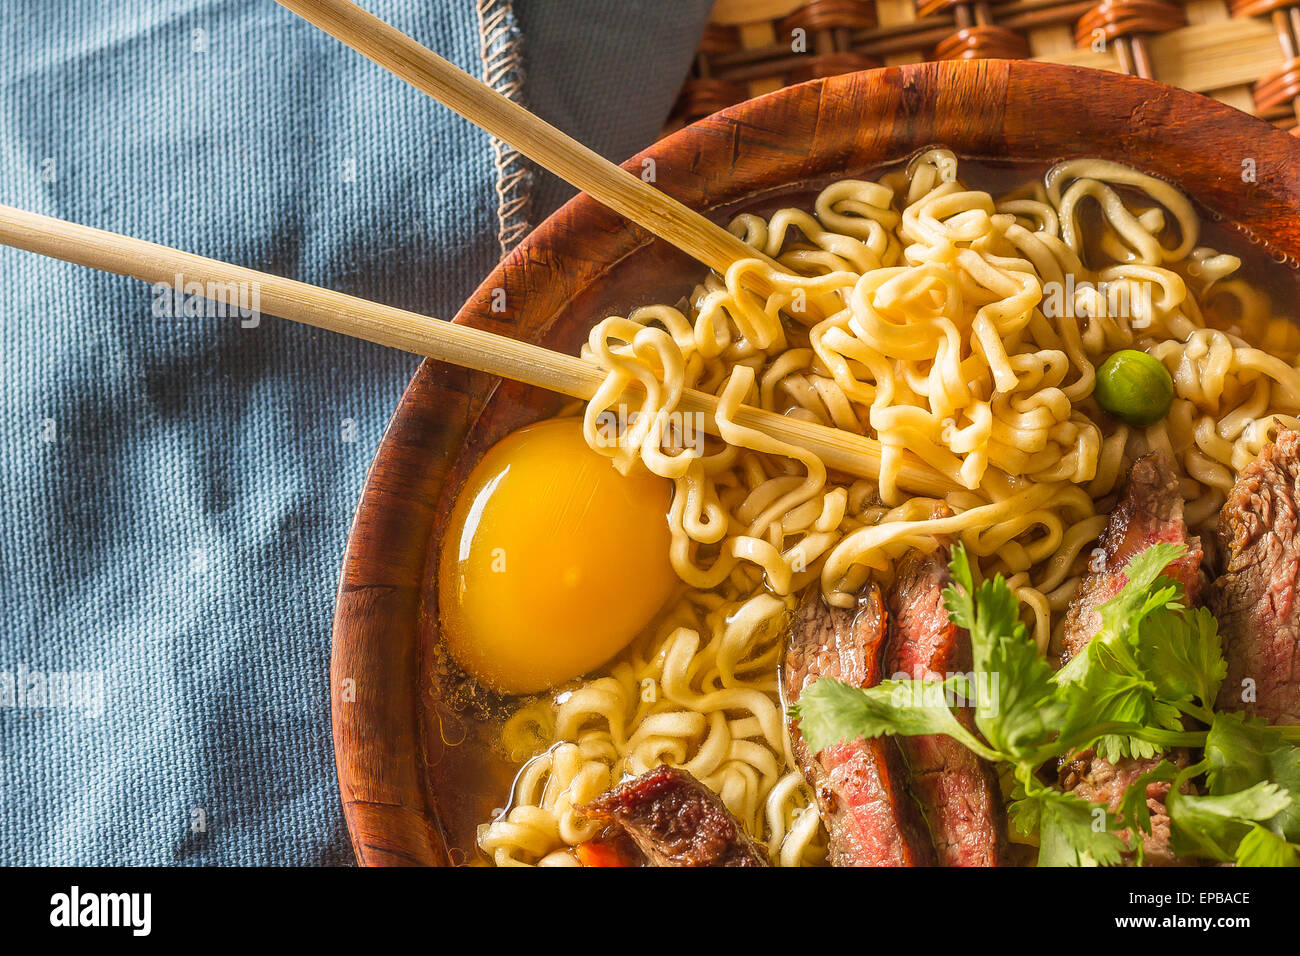 Beef ramen served Asian style. Raw egg cooks in steaming hot savory broth Stock Photo